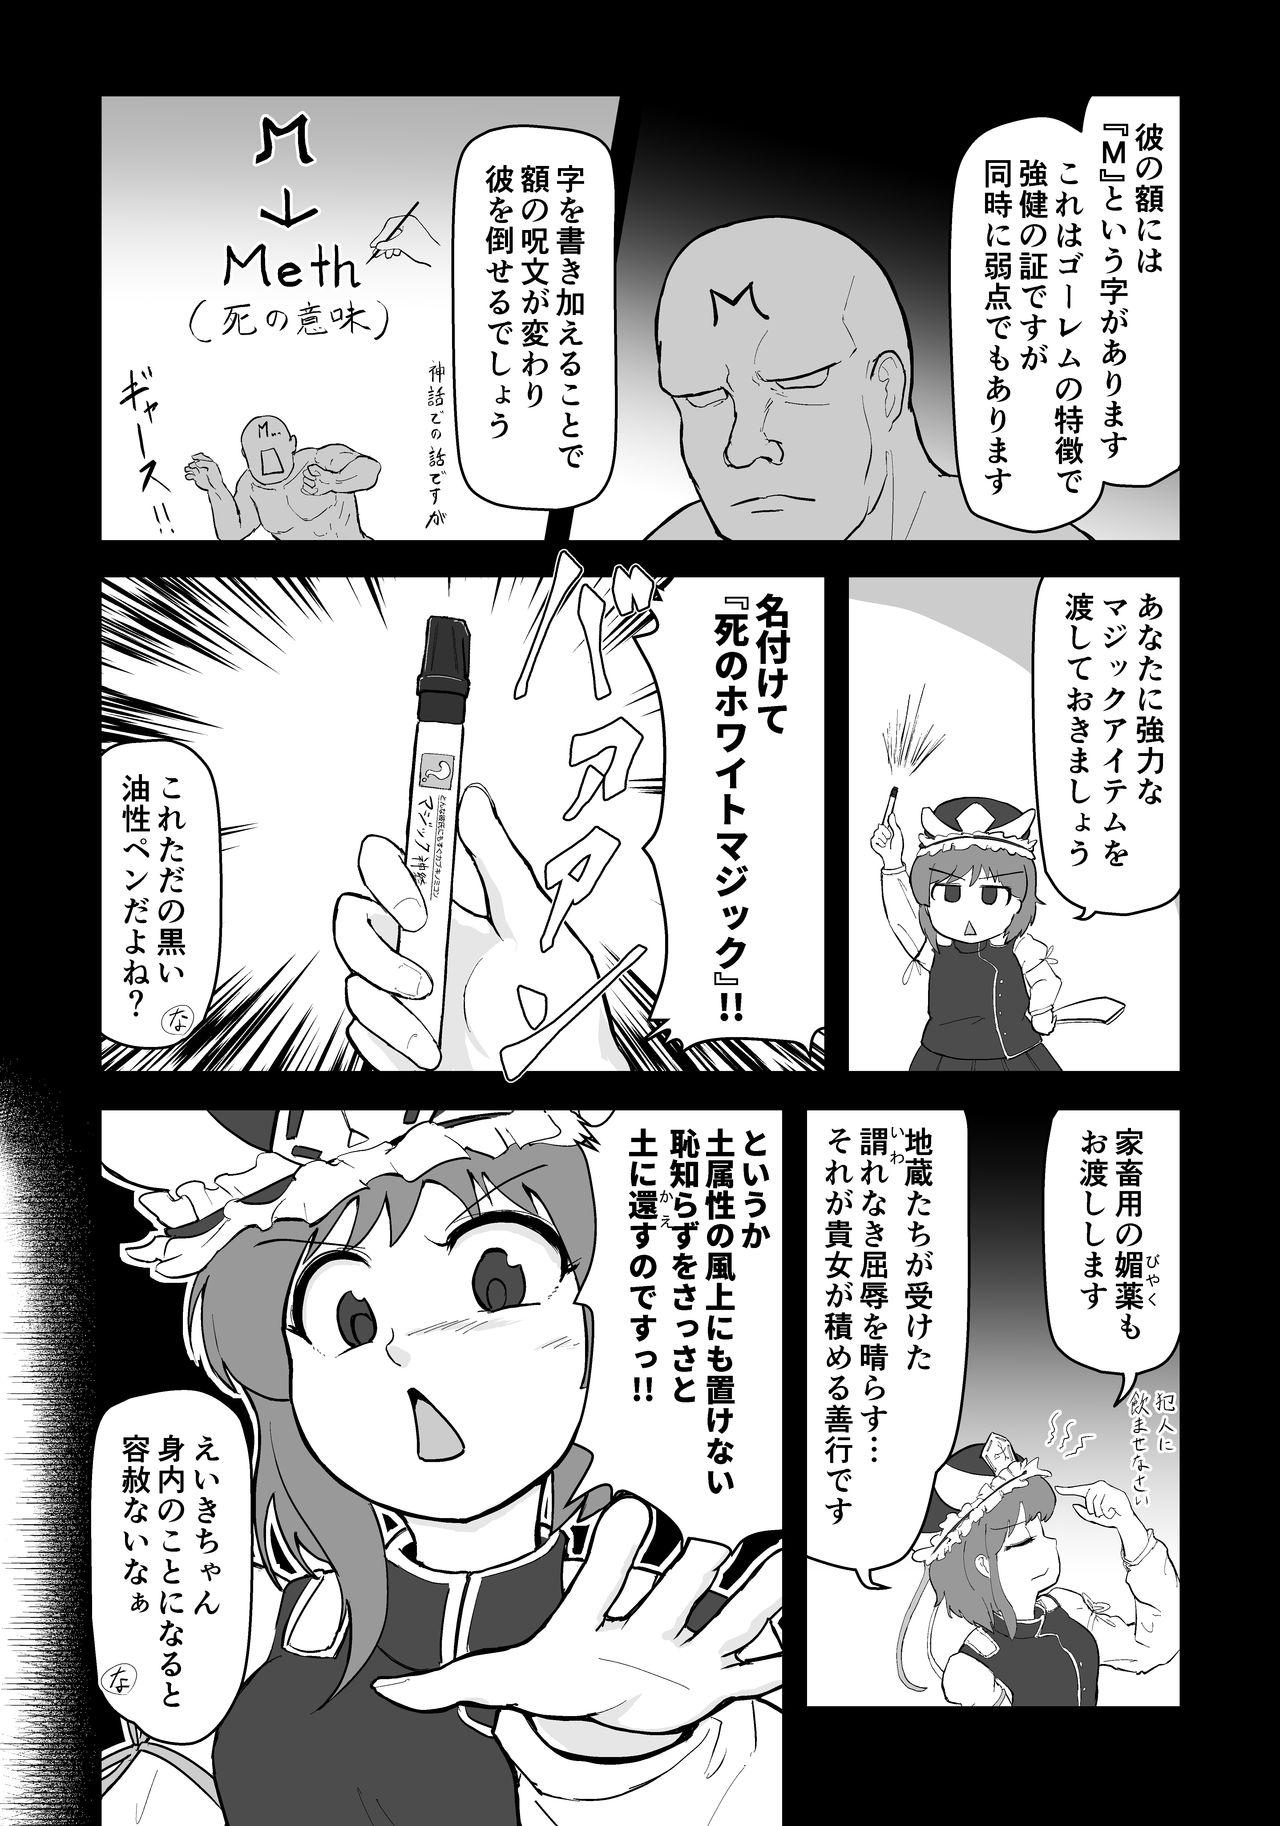 China I will mash you ! - Touhou project American - Page 4